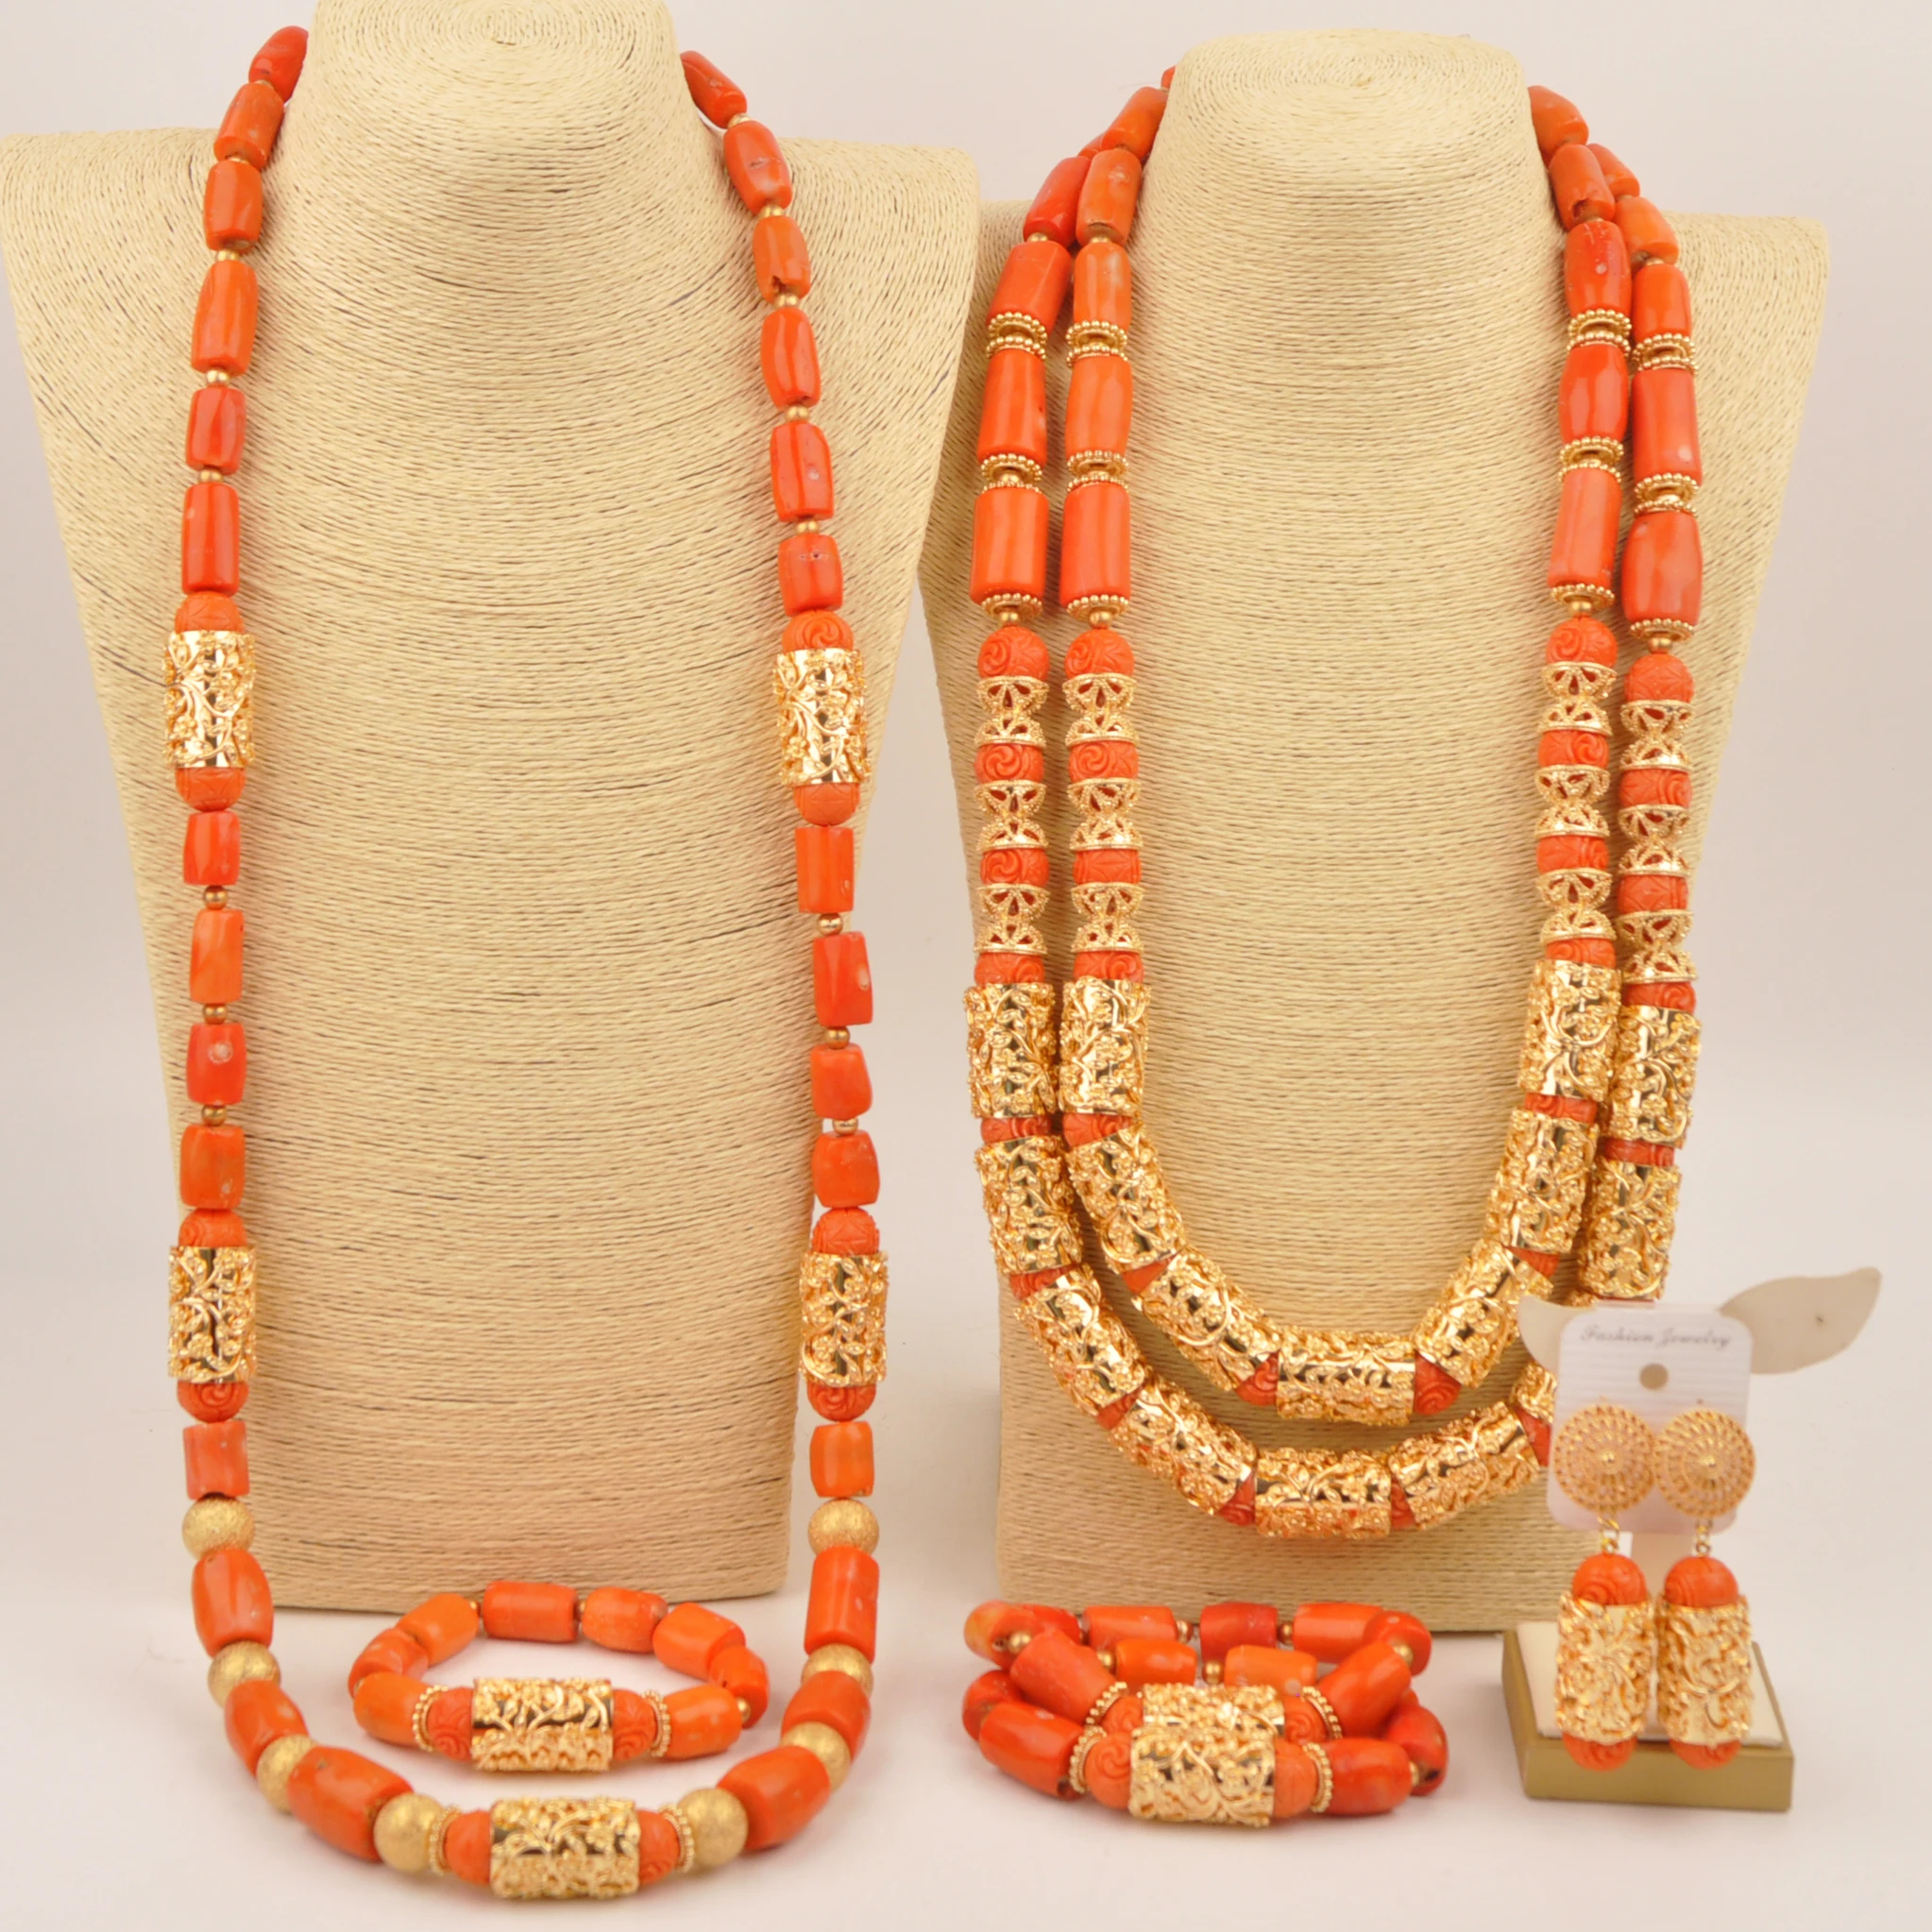 

Nigeria Orange jewelry fashion wedding couple natural coral bead necklace set in Africa